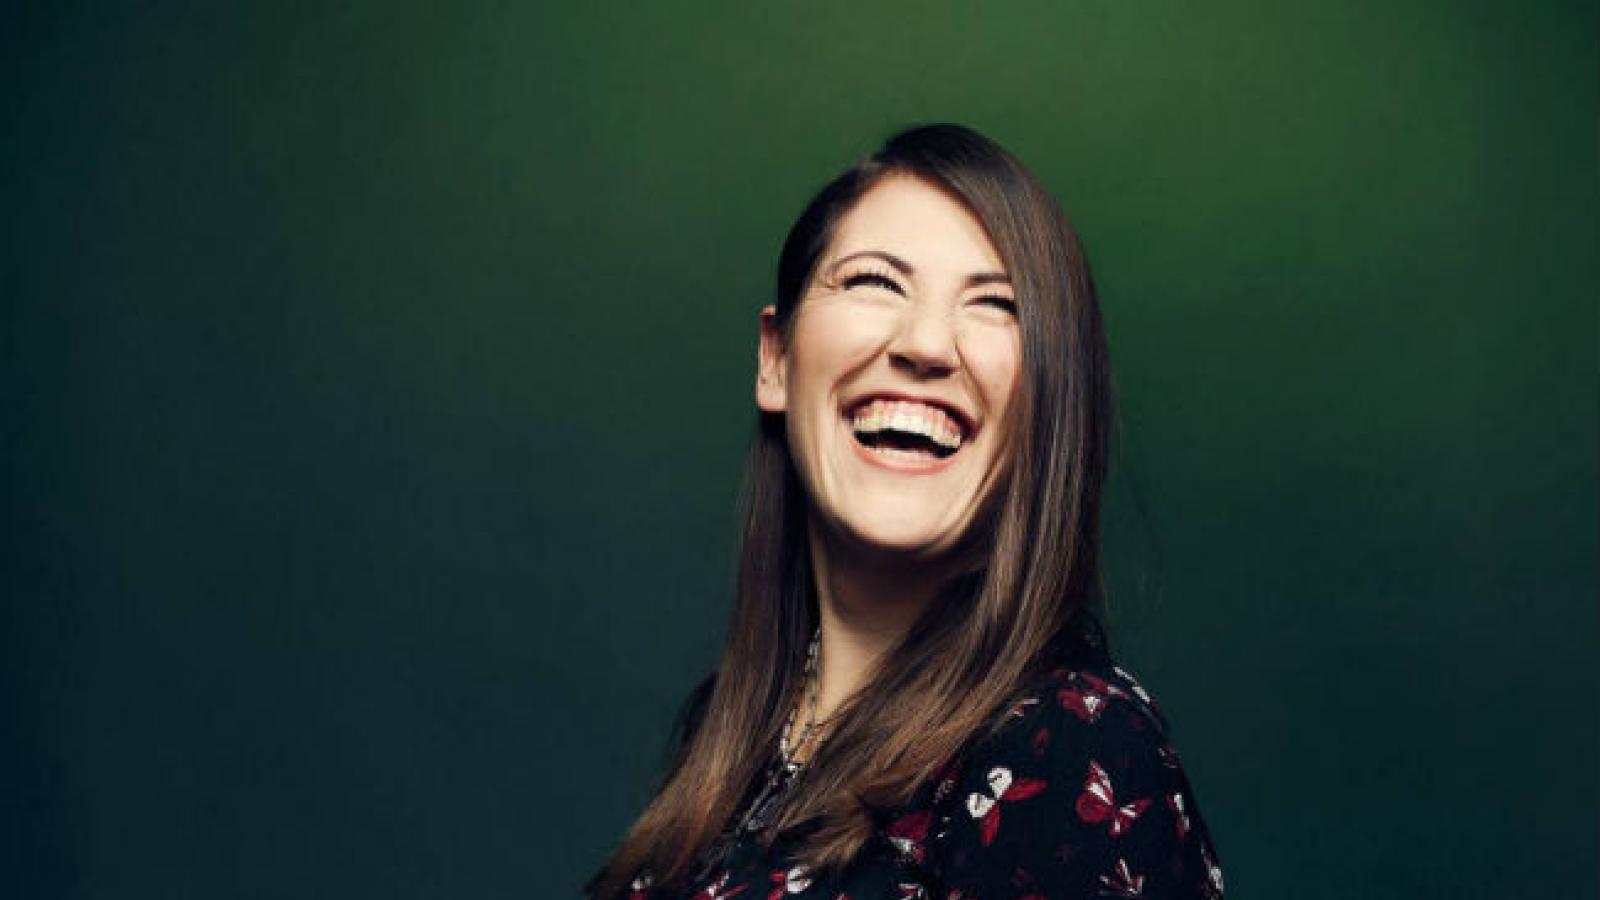 Portrait of woman with brown hair laughing